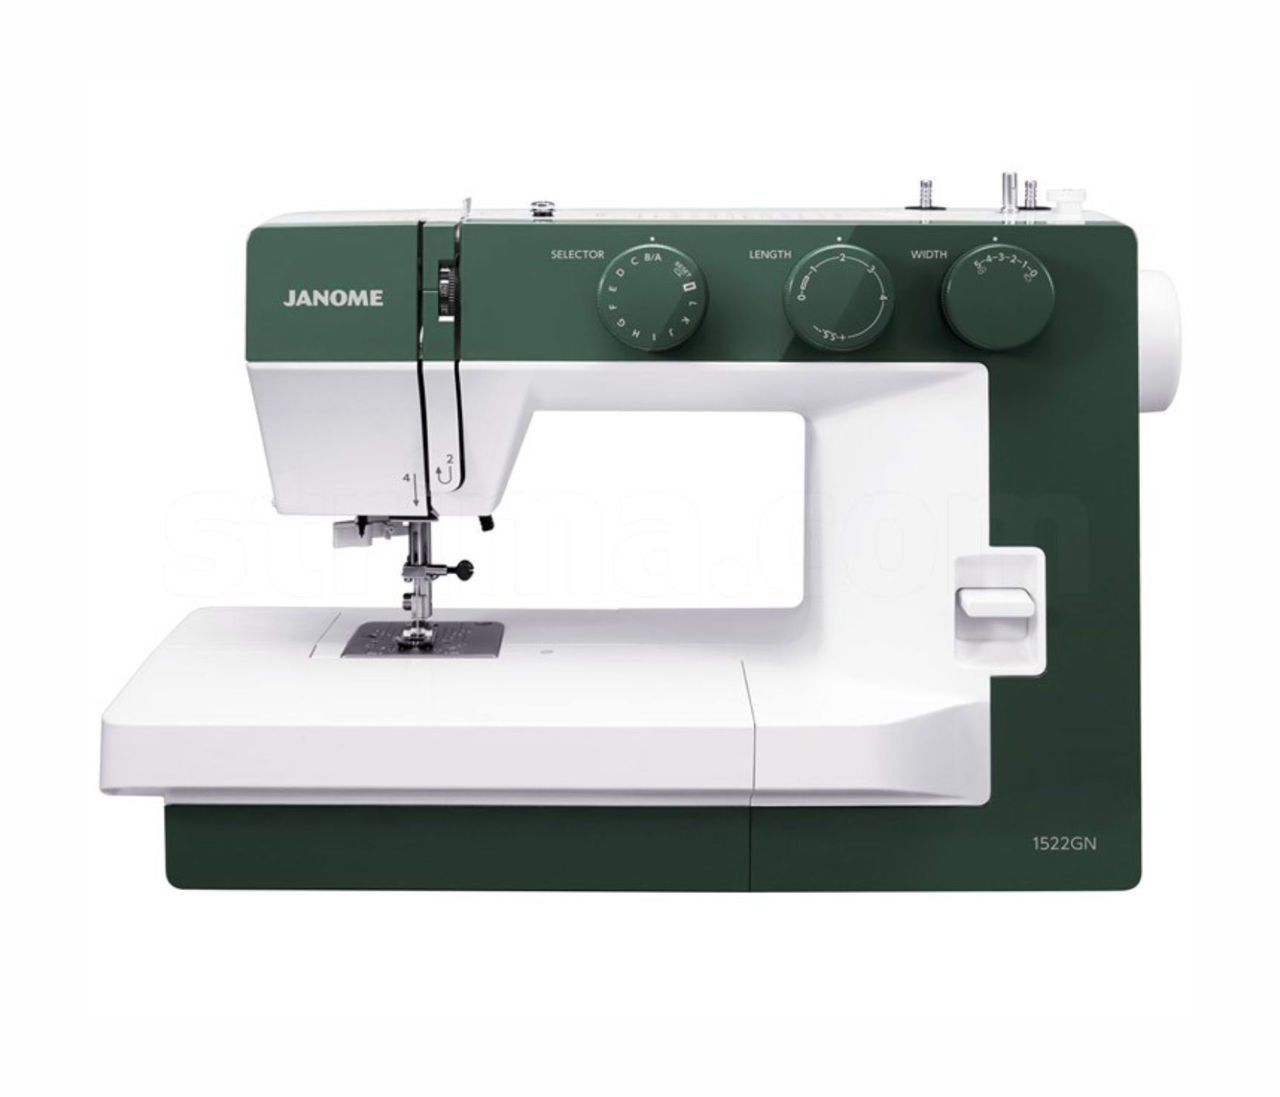 Машинка janome 1522. Janome 1522gn. Швейная машина Janome 1522bl. Электромеханическая швейная машина Janome 1522gn. Janome 1522rd (Red).